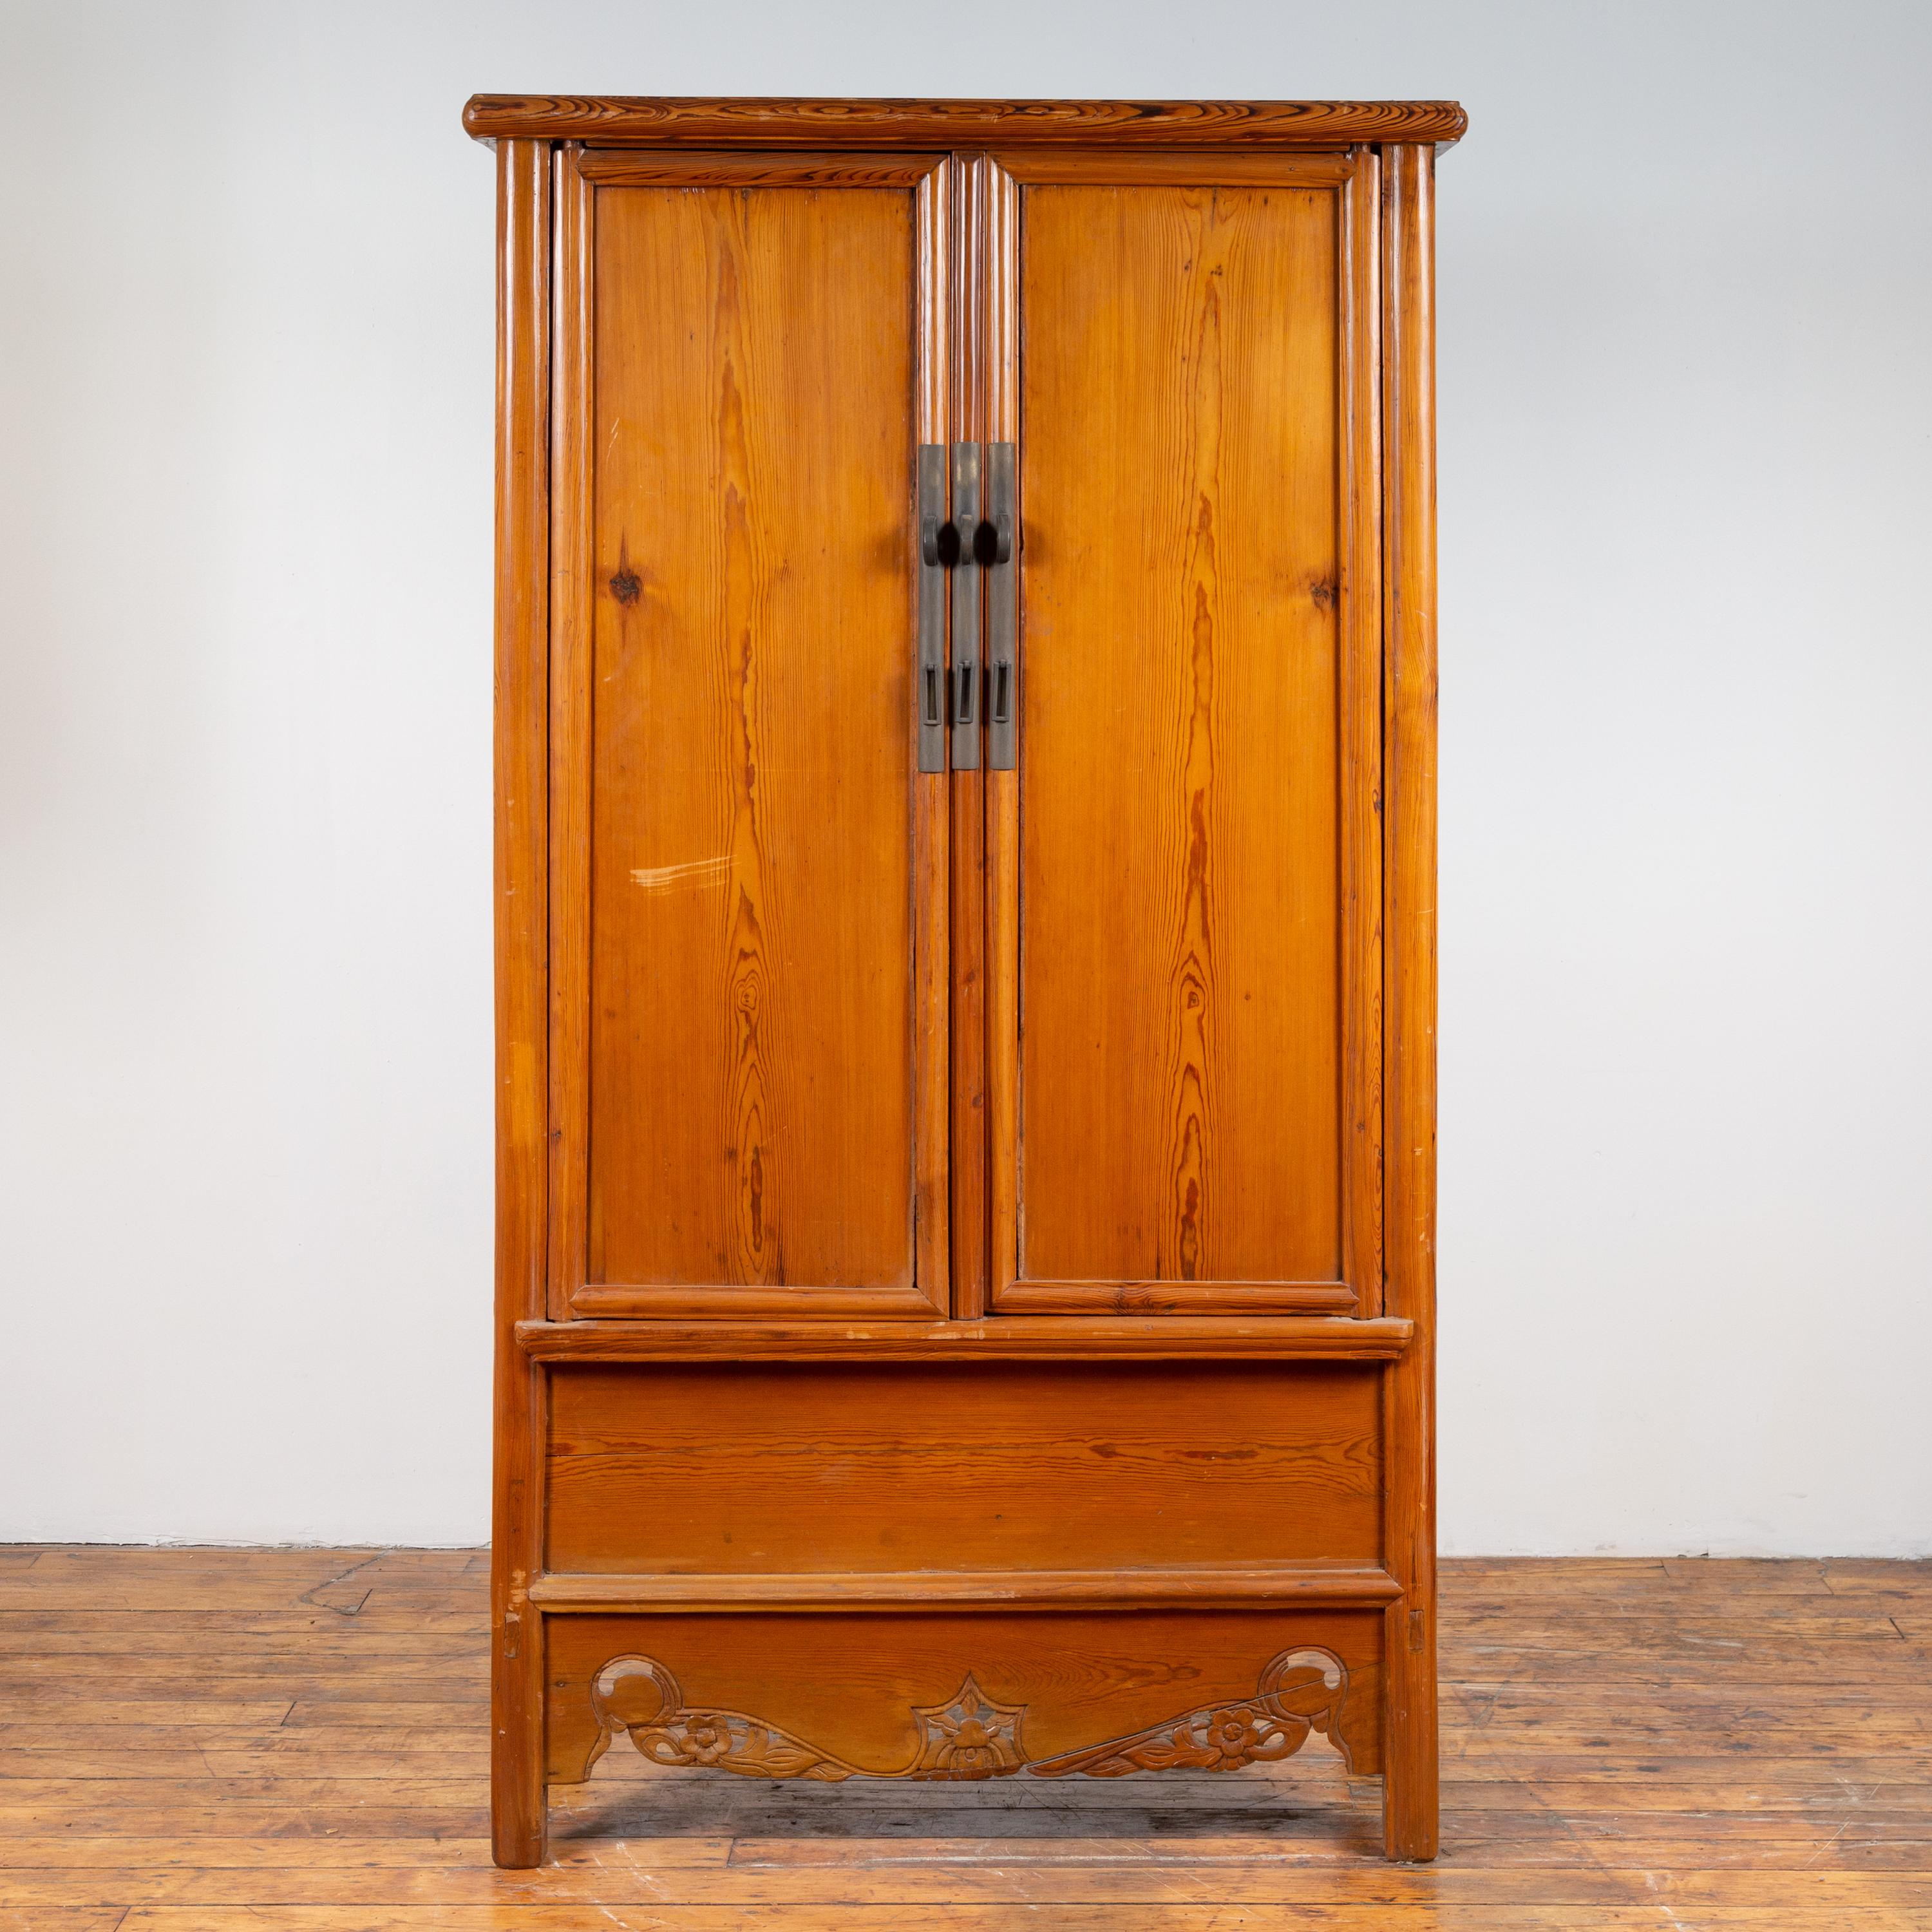 A Chinese Ming dynasty style elmwood wardrobe from the early 20th century, with two doors, hidden drawers and carved skirt. Born in China during the early years of the 20th century, this exquisite elm armoire features a simple cornice overhanging